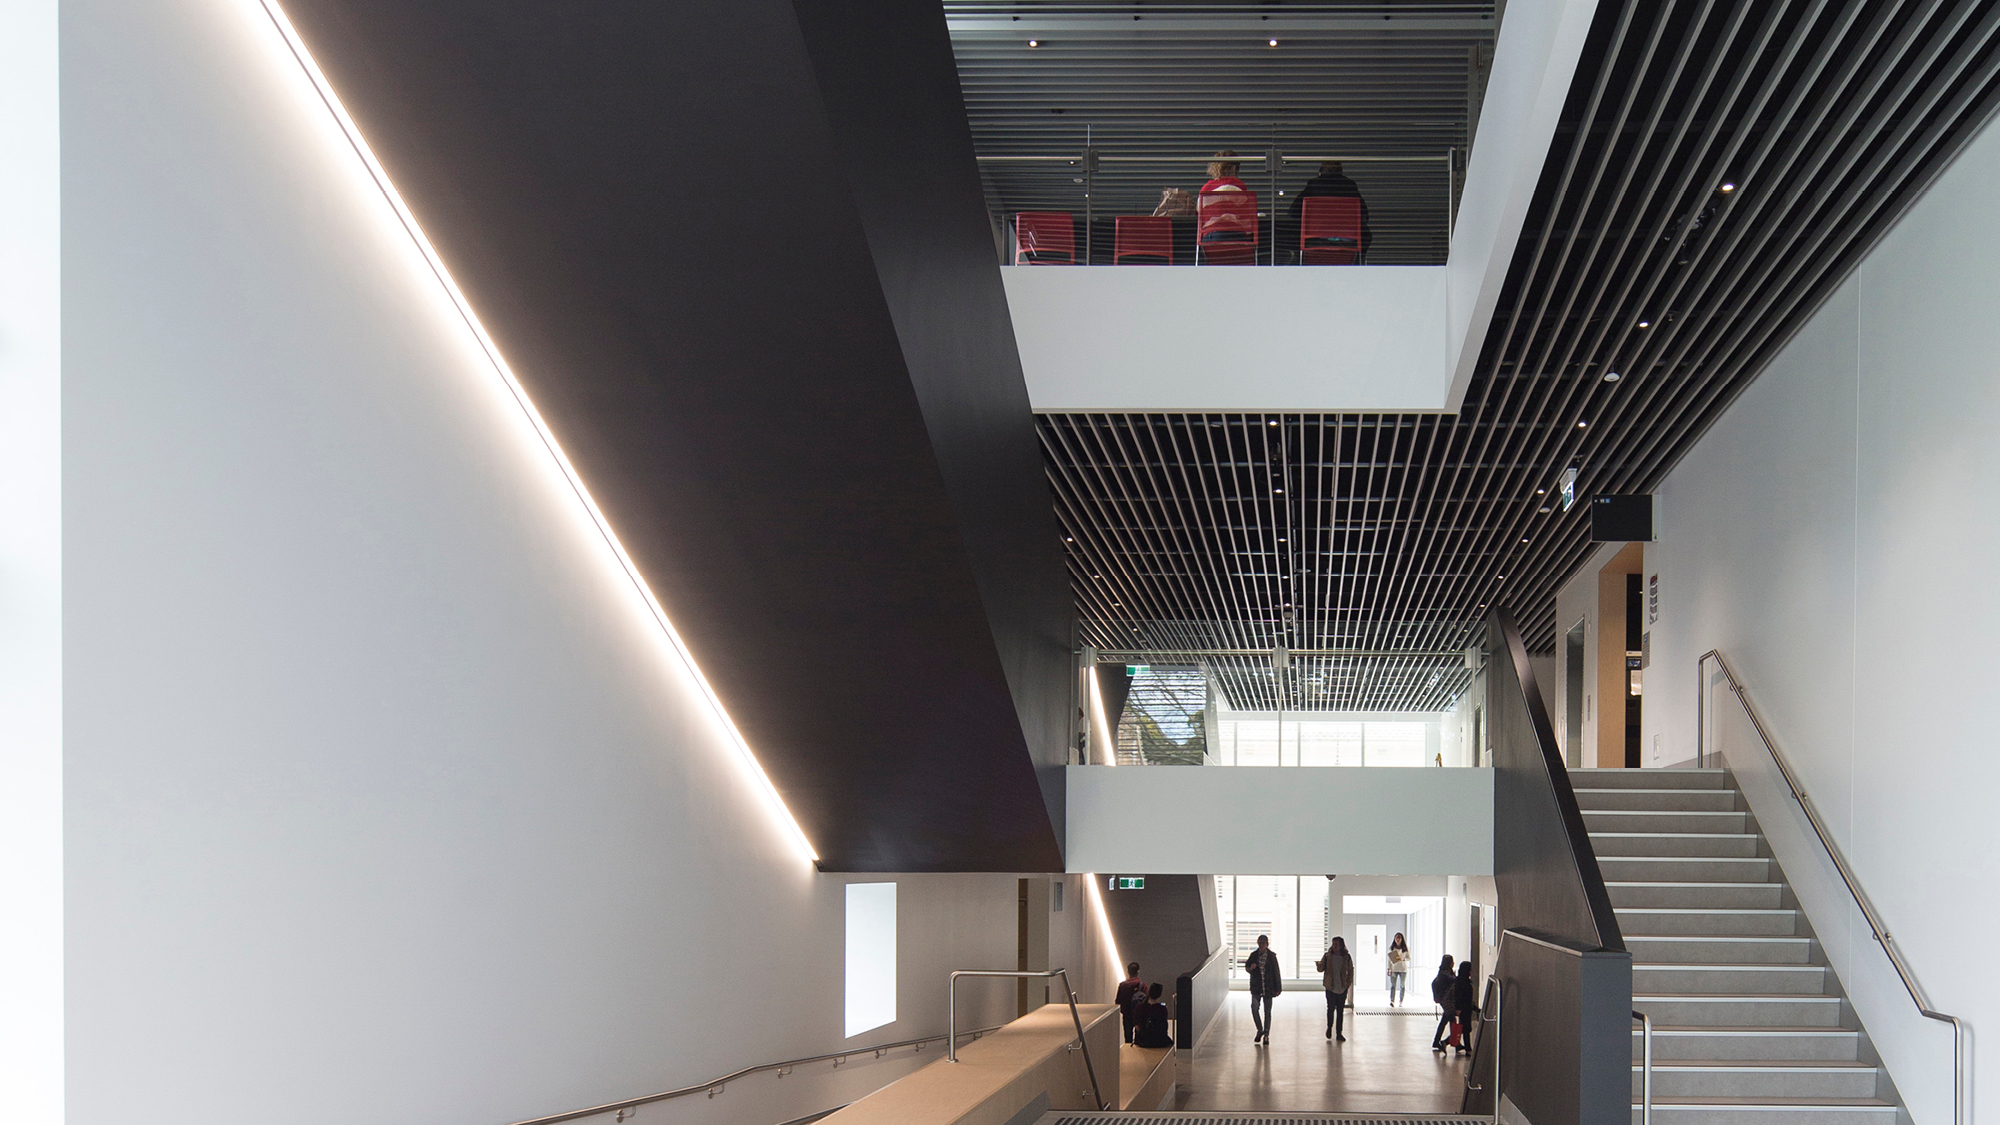 Interior of the nanoscale research centre building showing foyer, staircase and void